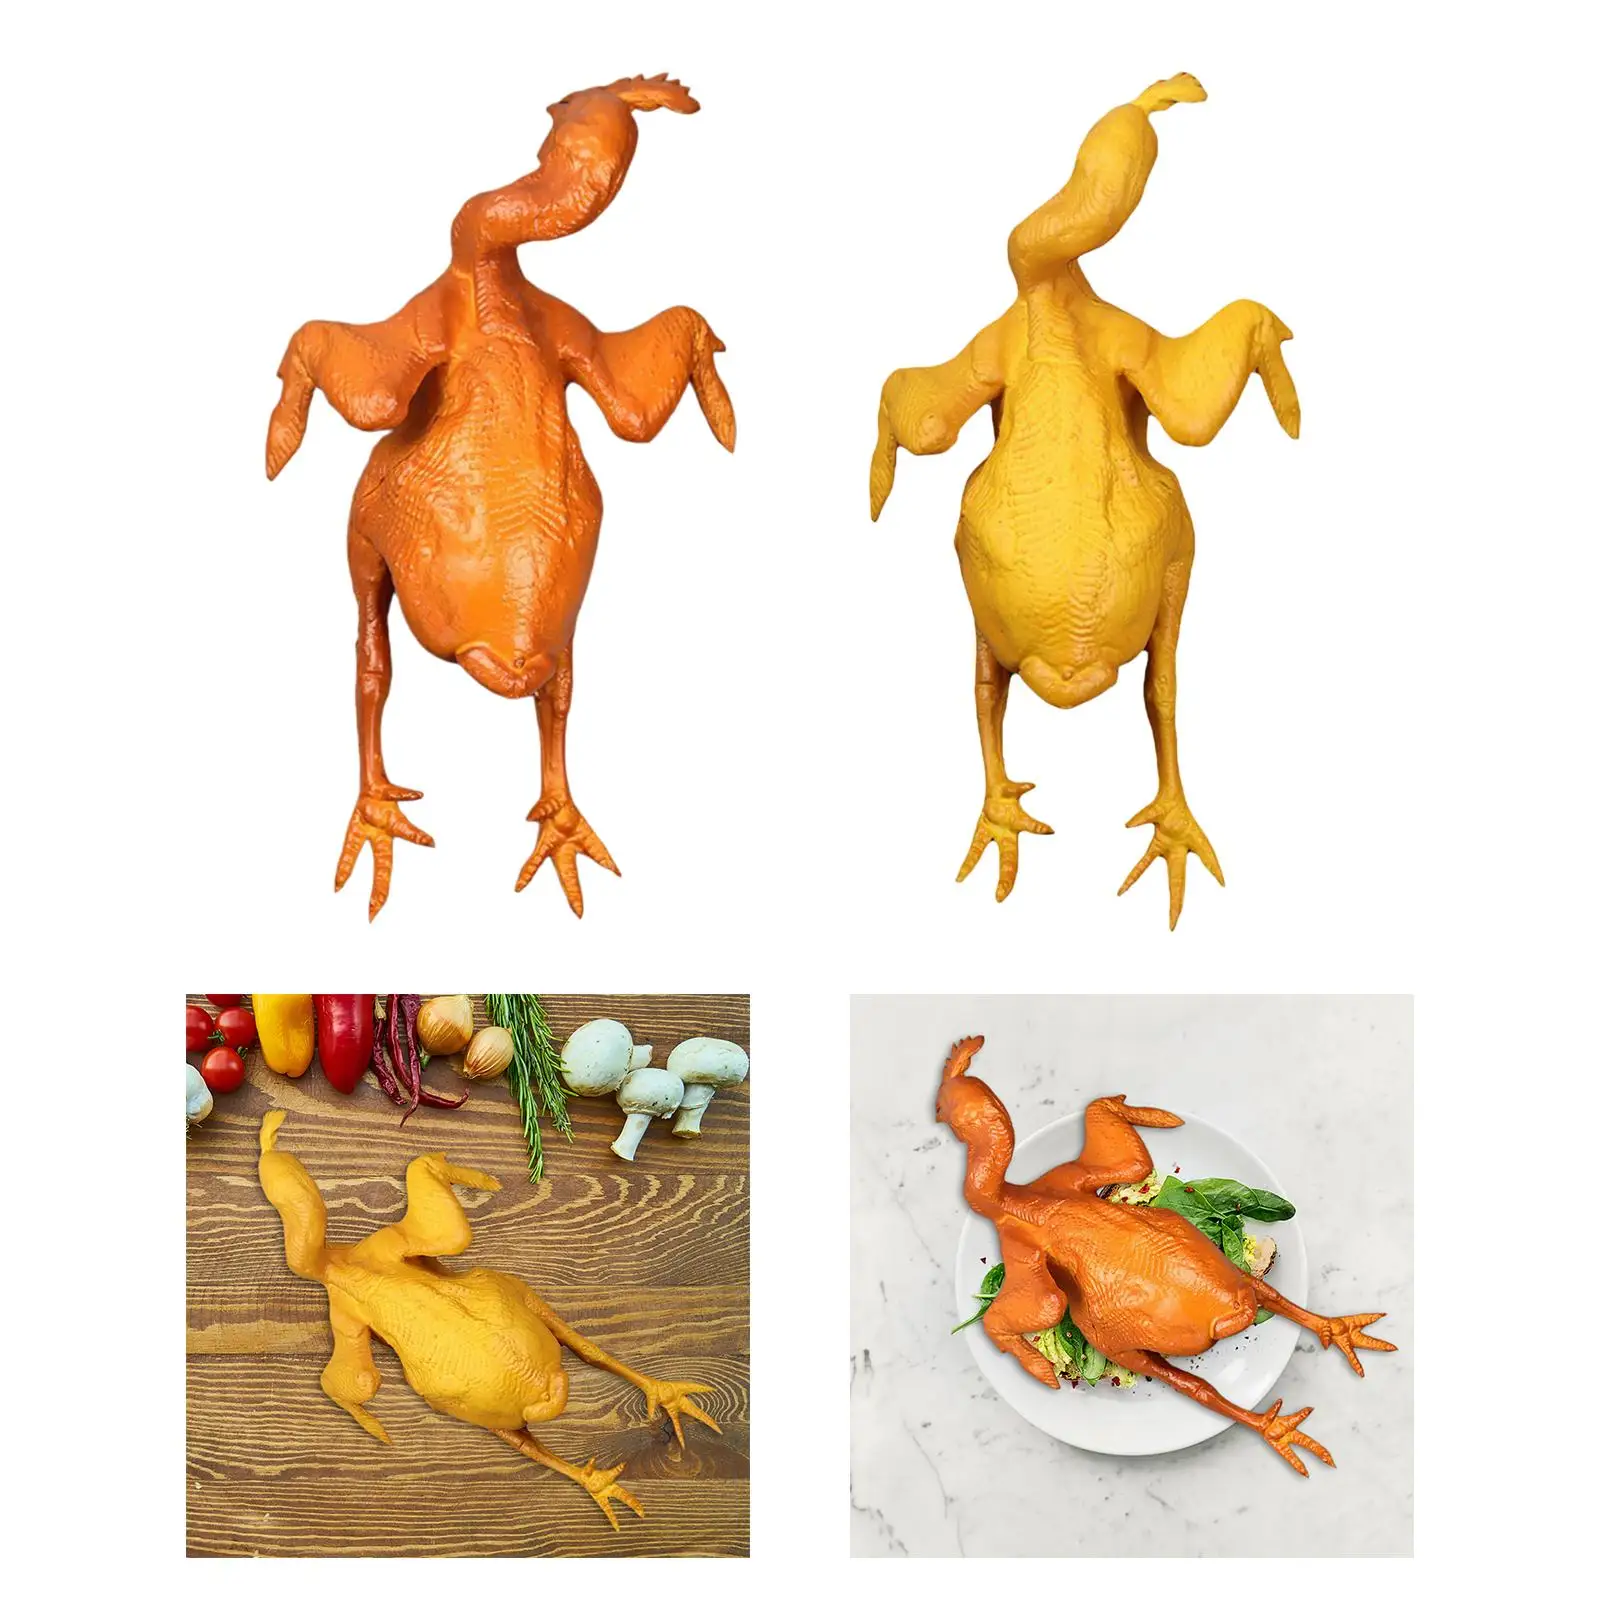 Roast Chicken Model Fake Food Photography Props for Dining Table Decoration